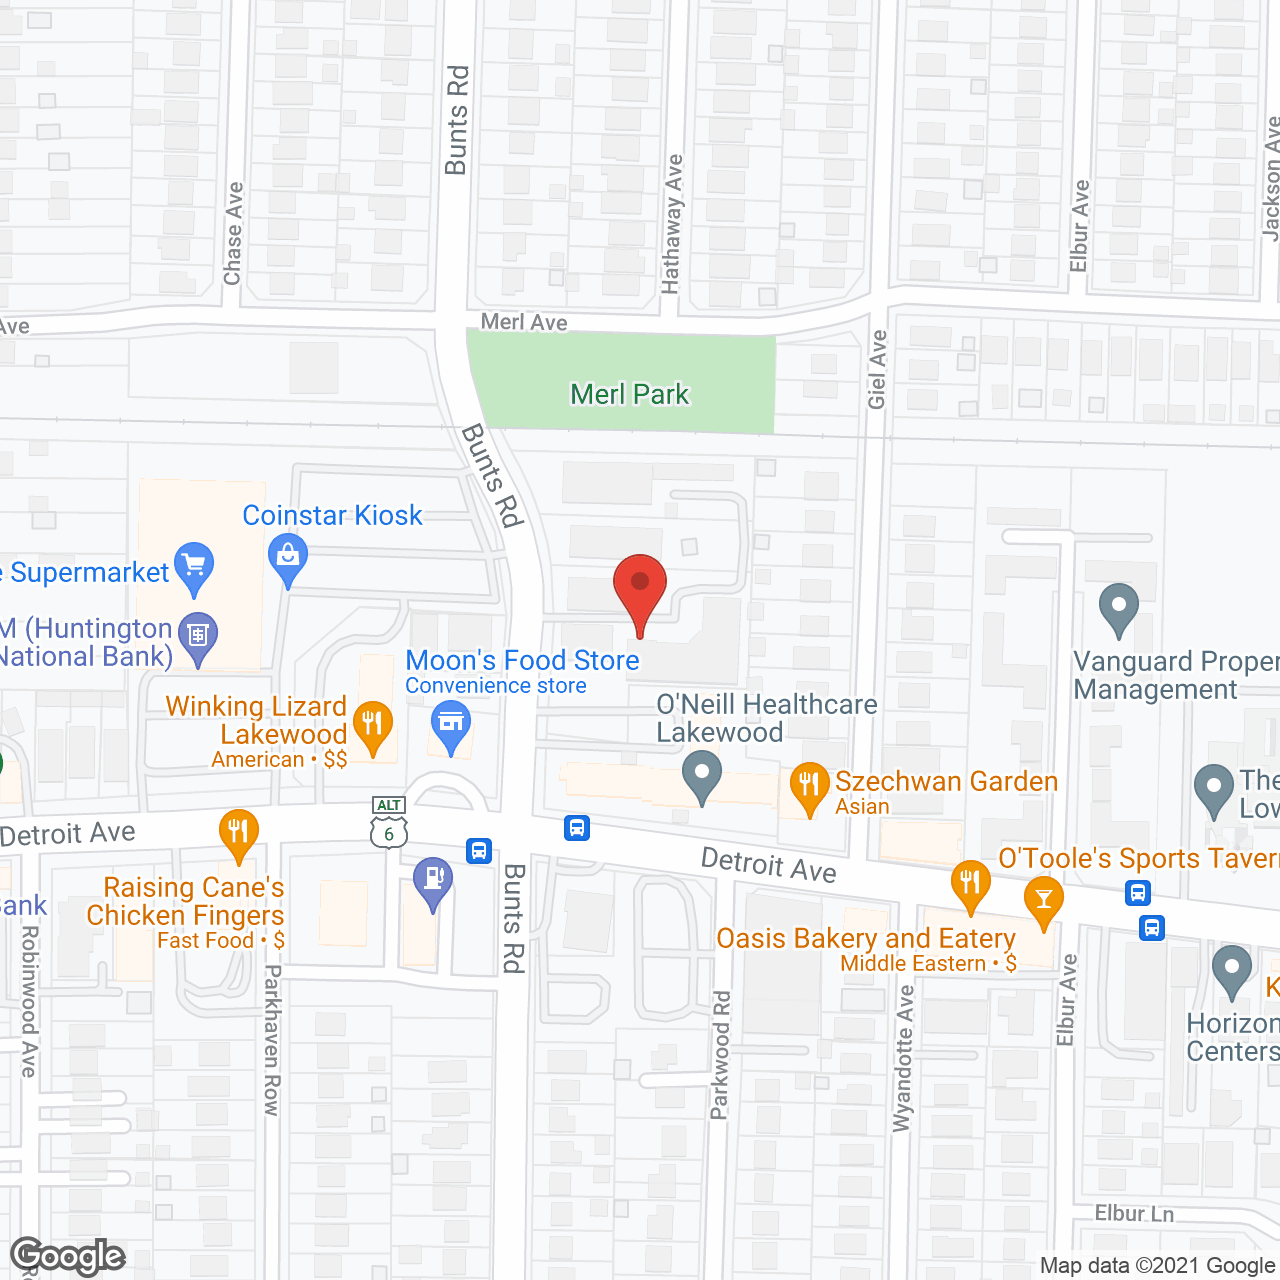 O'Neill Healthcare Lakewood in google map